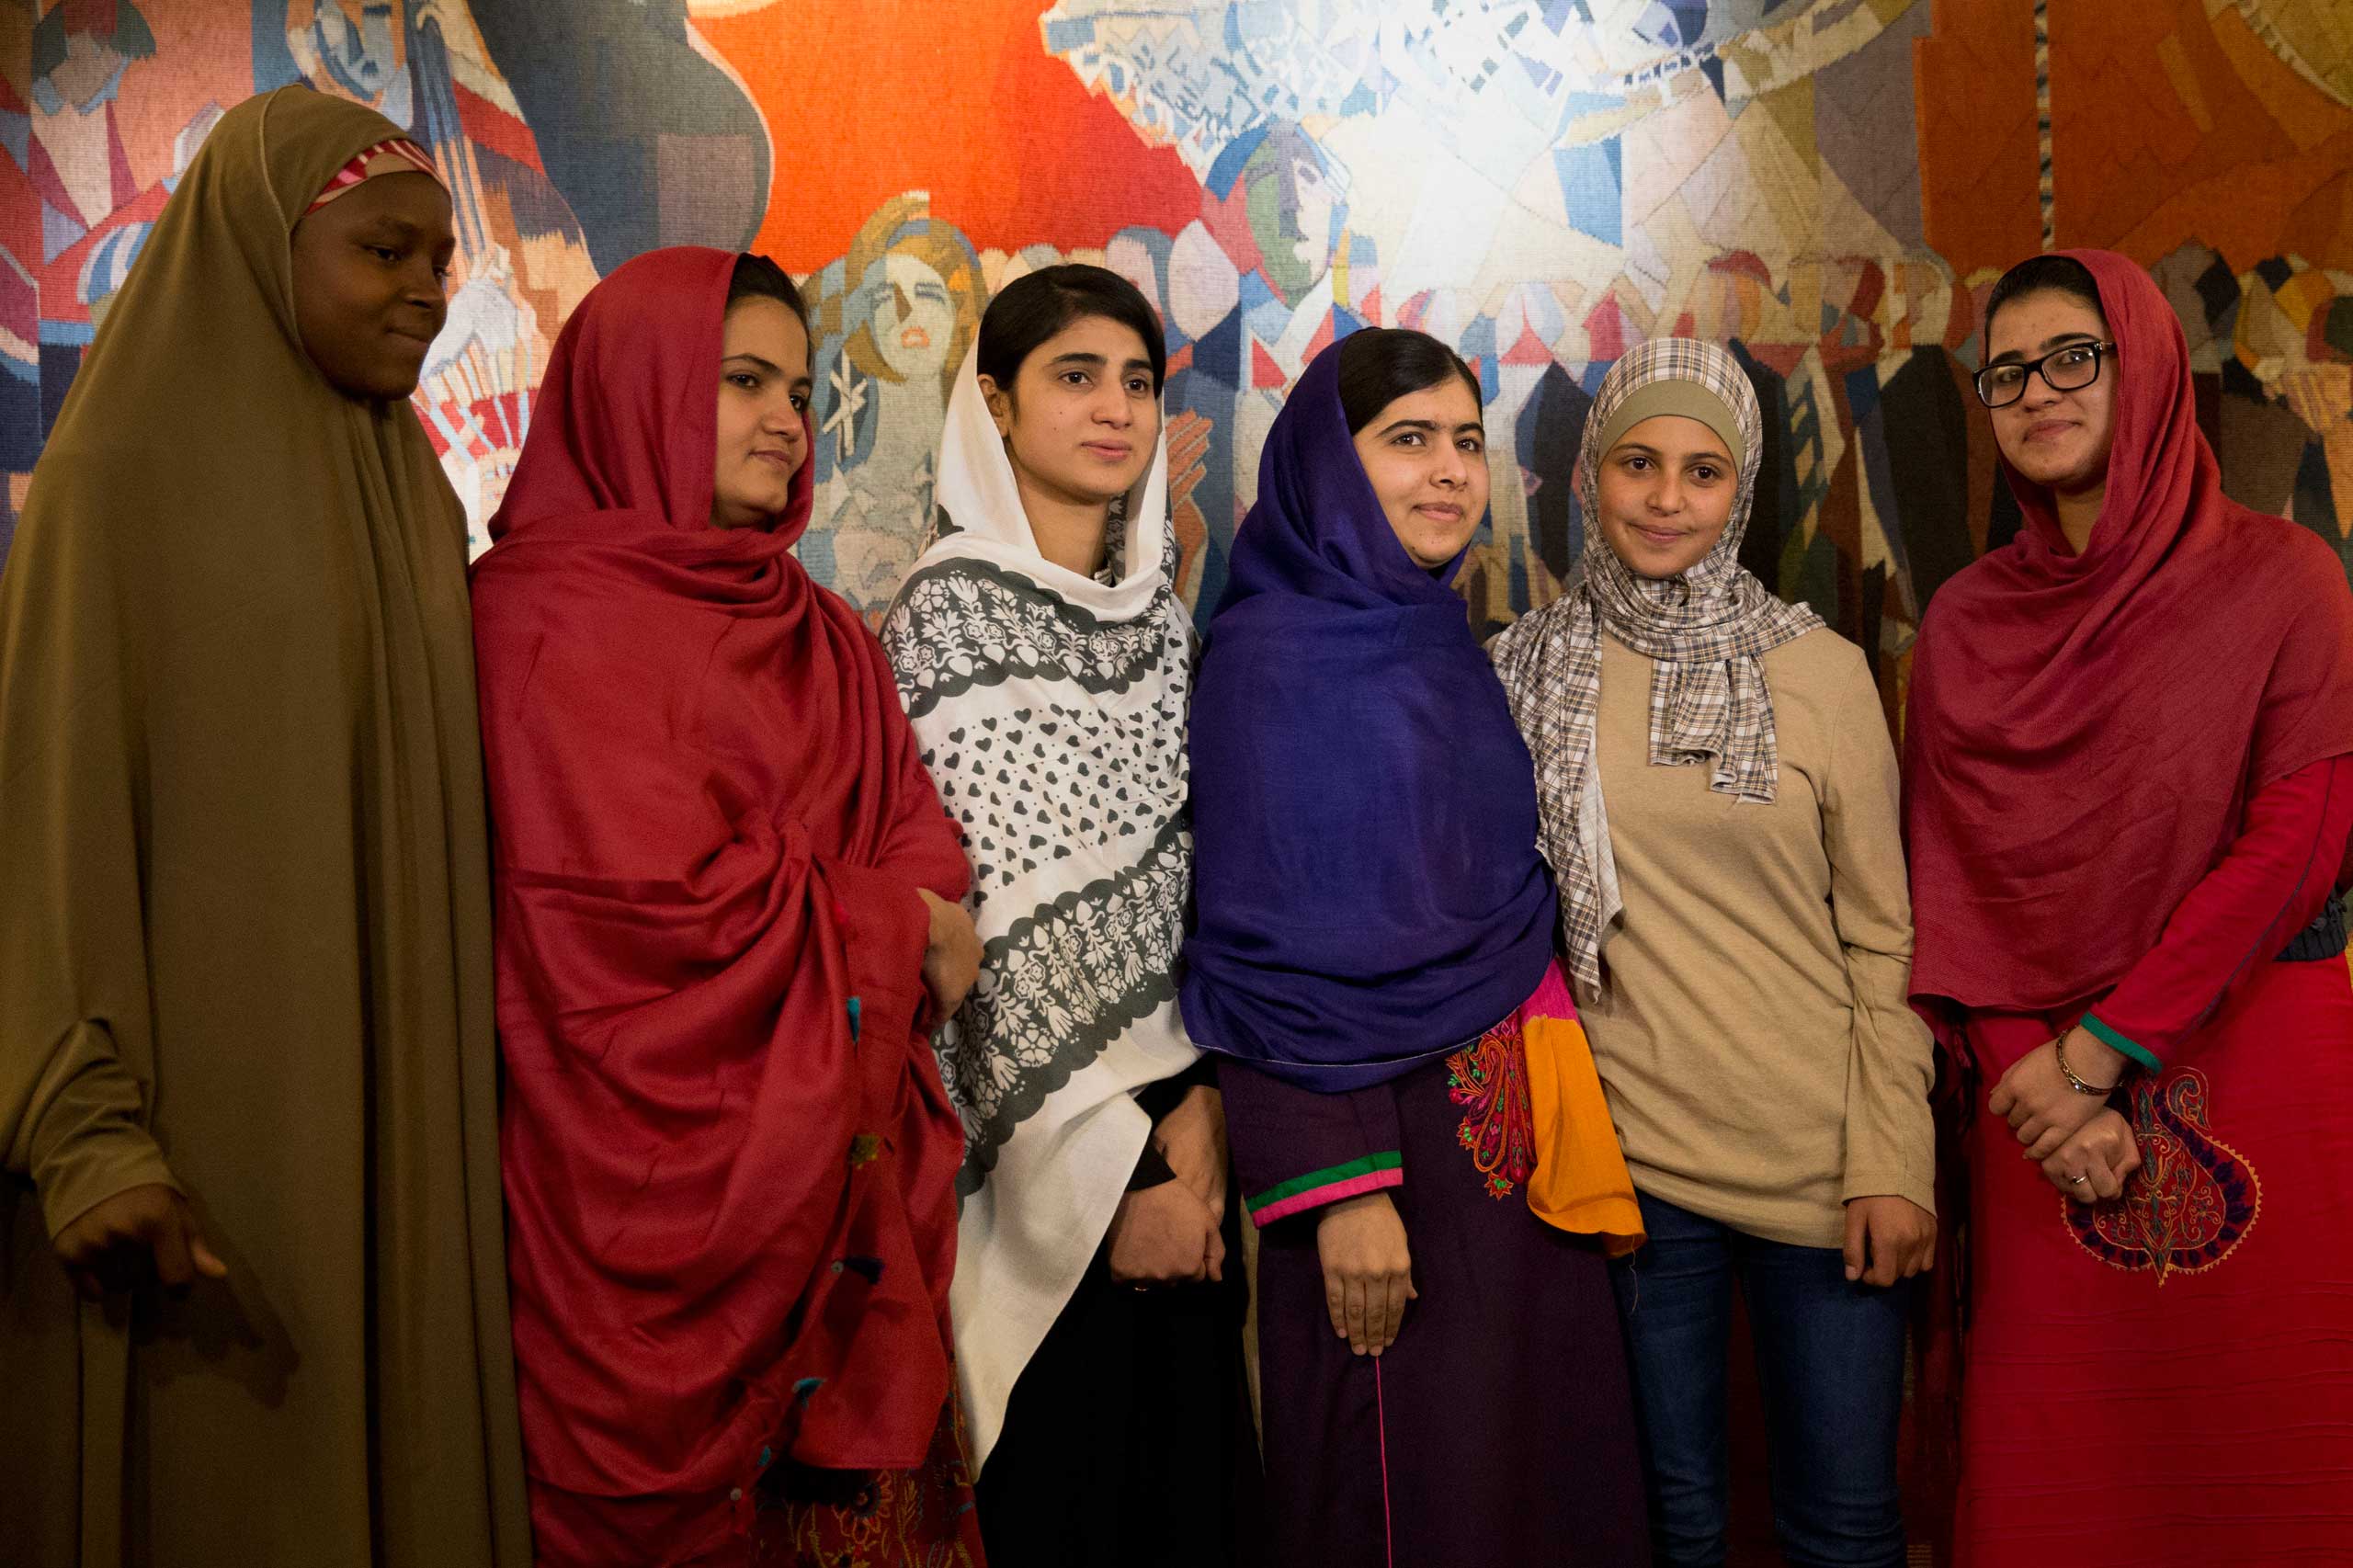 Joint Nobel Peace prize winner Malala Yousafzai, stands with five young women she invited to attend the Nobel Peace Prize ceremony, from left, Nigeria's Amina Yusuf, Pakistan's Kainat Soomro, school friend Shazia Ramzan, Syria's Mezon Almellehan and school friend Kainat Riaz, as they pose for a group photograph before speaking to the media at Malala's hotel in Oslo, Norway, Dec. 9, 2014. (Matt Dunham—AP)